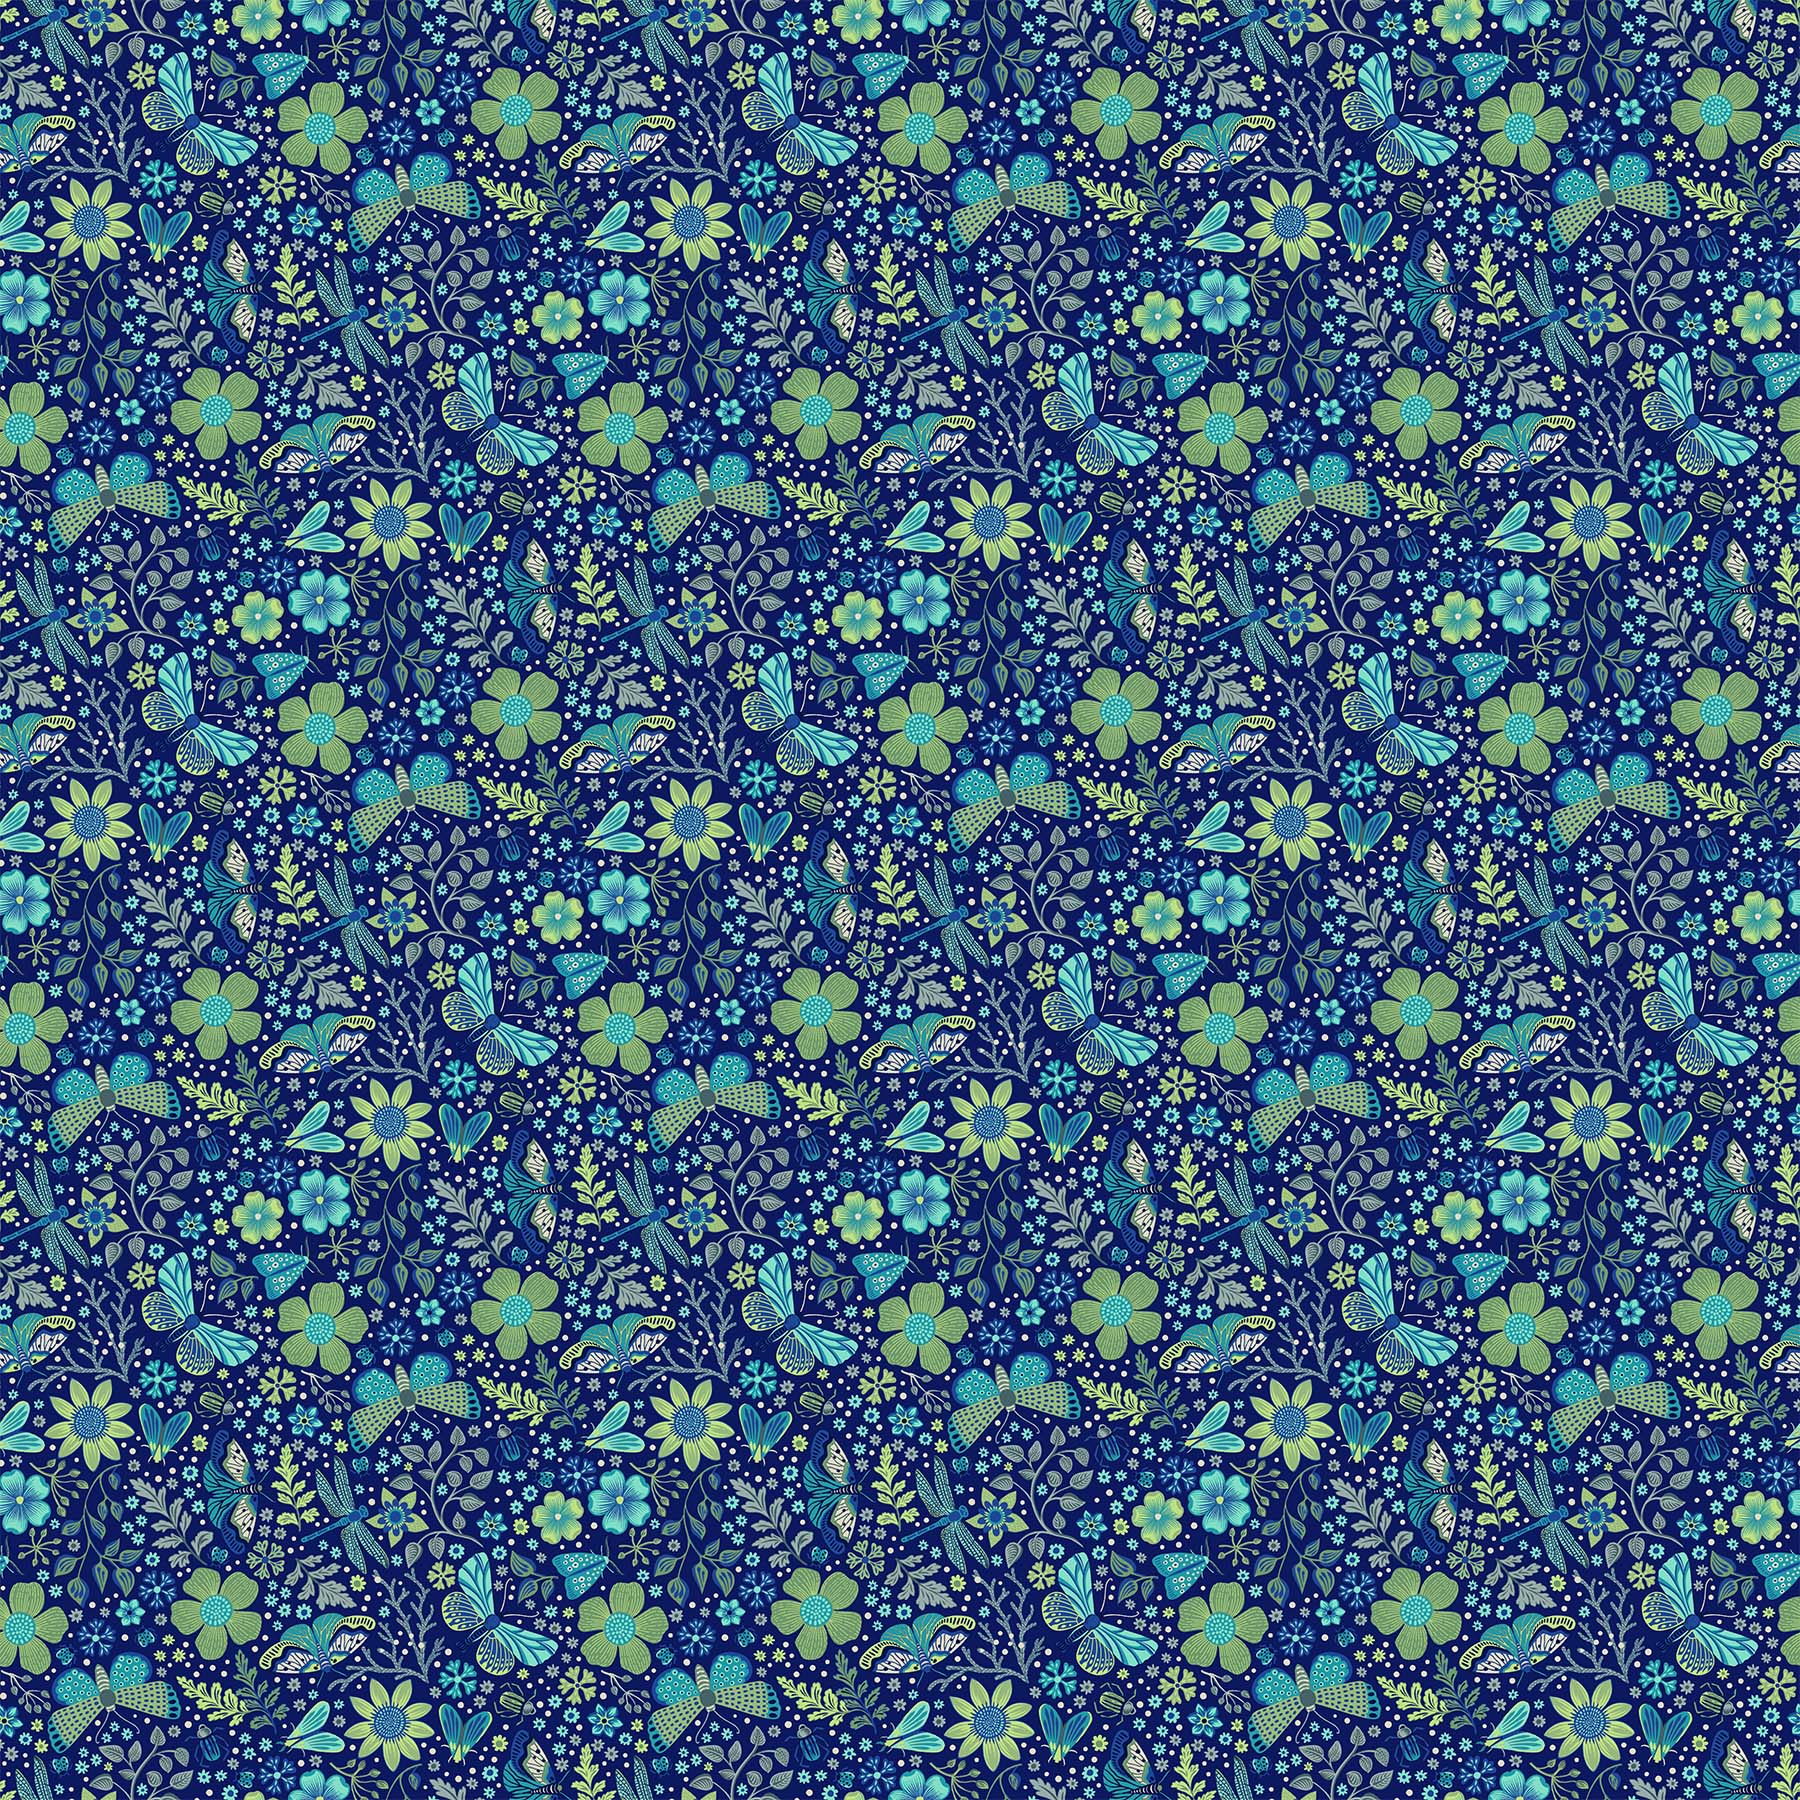 Waters Edge - 26712-49 - Cotton Fabric